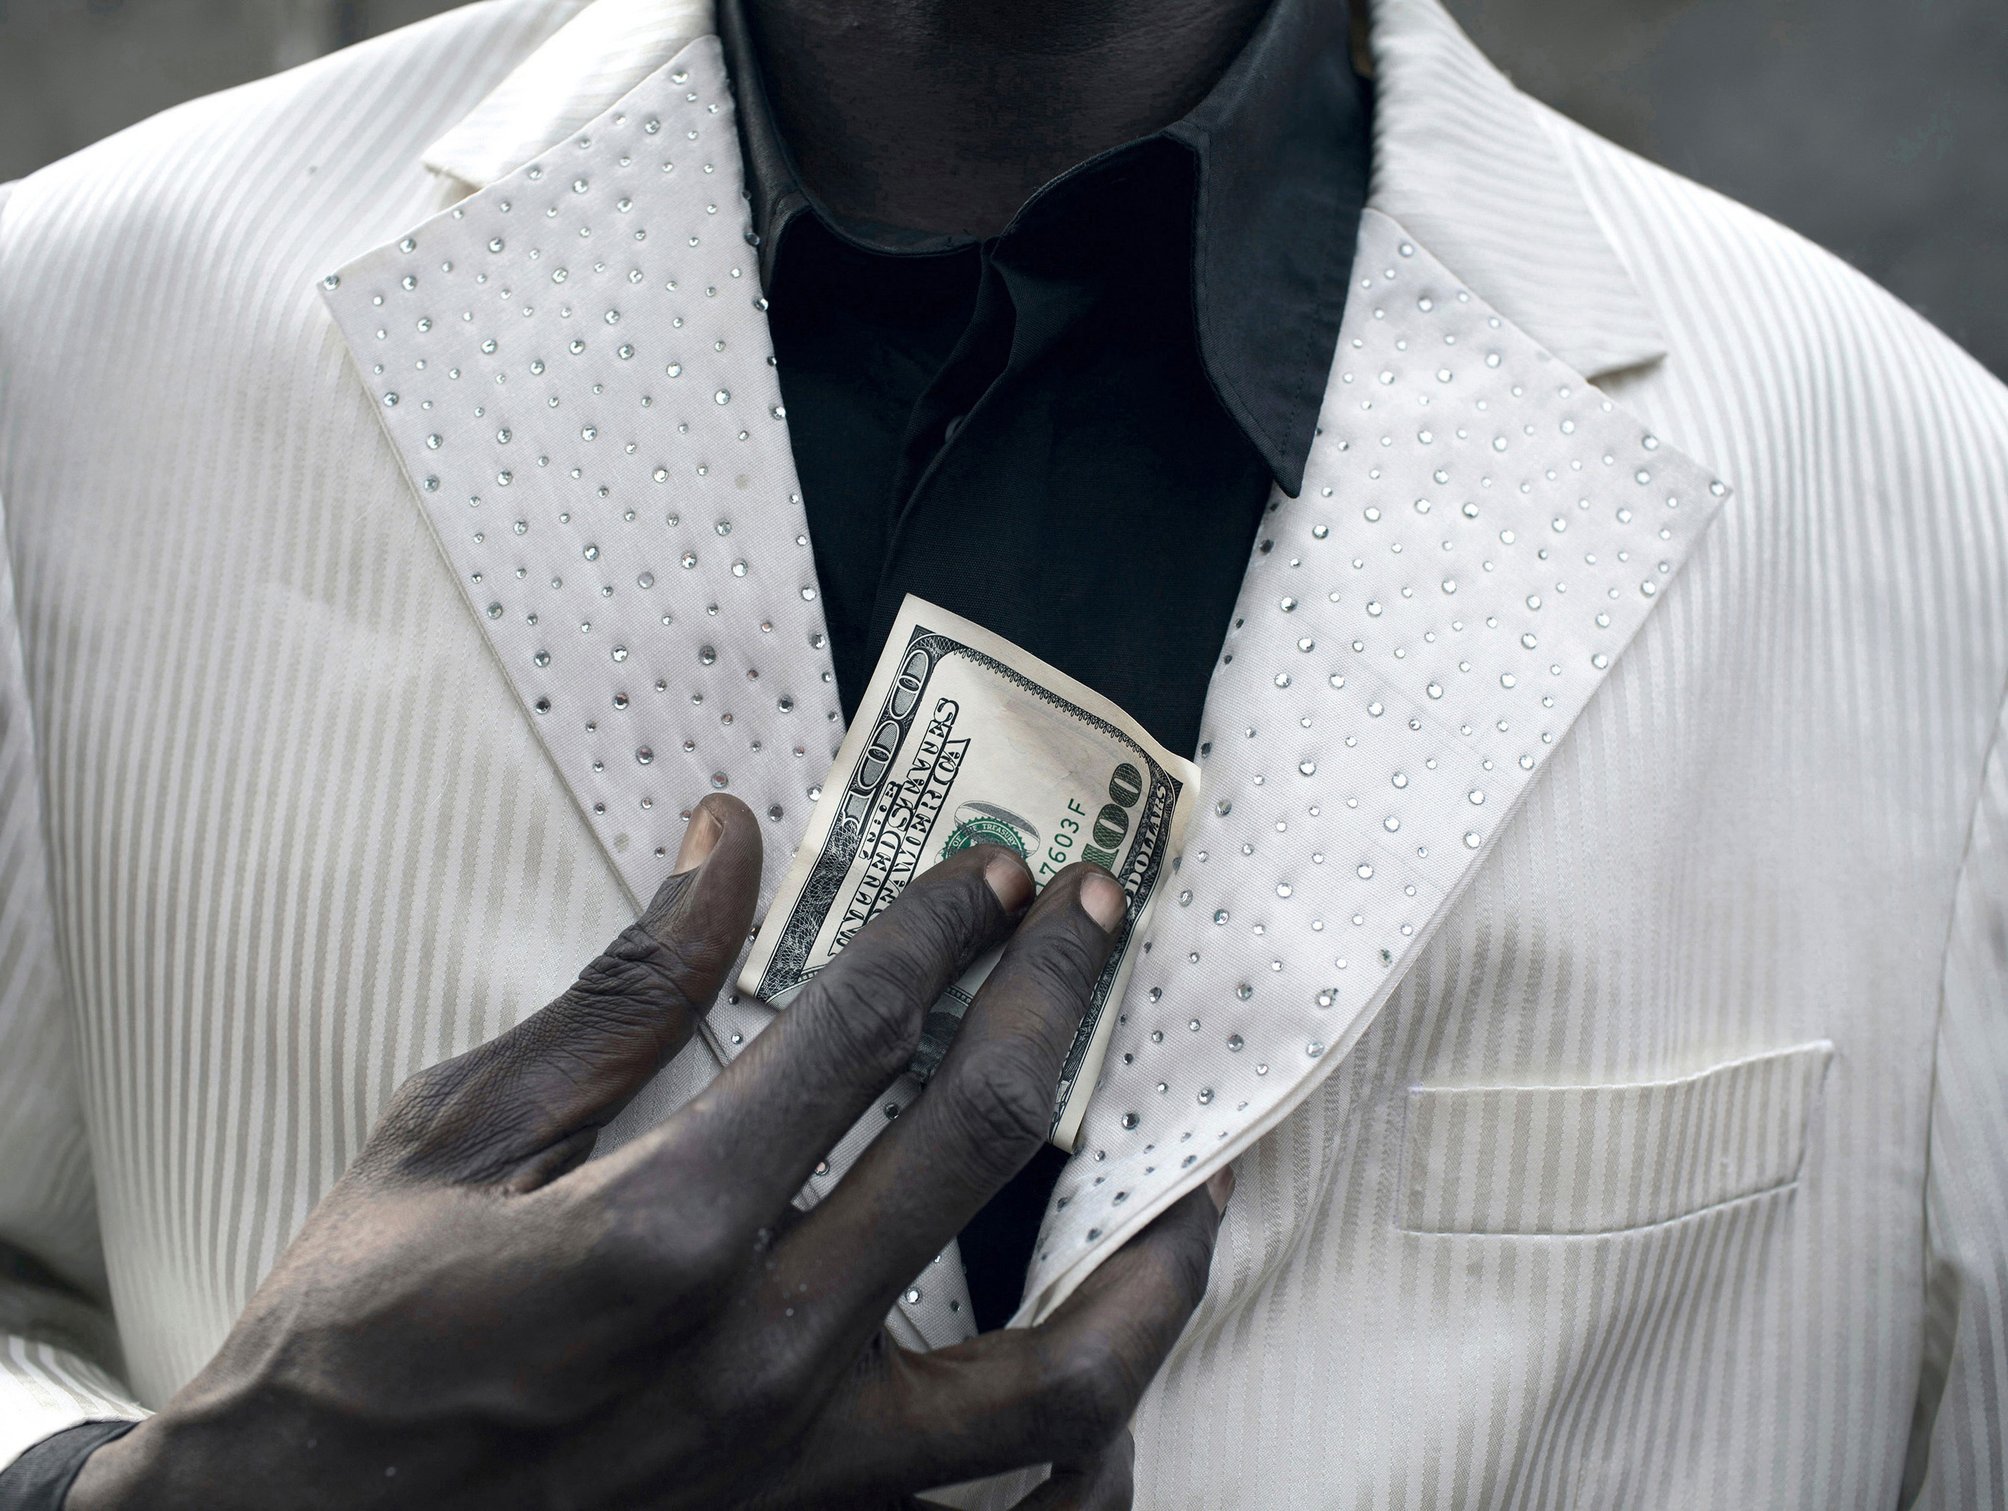  KINSHASA, DEMOCRATIC REPUBLIC OF CONGO - FEBRUARY 12: Jika, a senior Sapeur shows a USA one hundred dollar bill while wearing his white diamond suit close to his home in the Mombele area on February 12, 2012 in Kinshasa, DRC. Jika loves Japanese fas